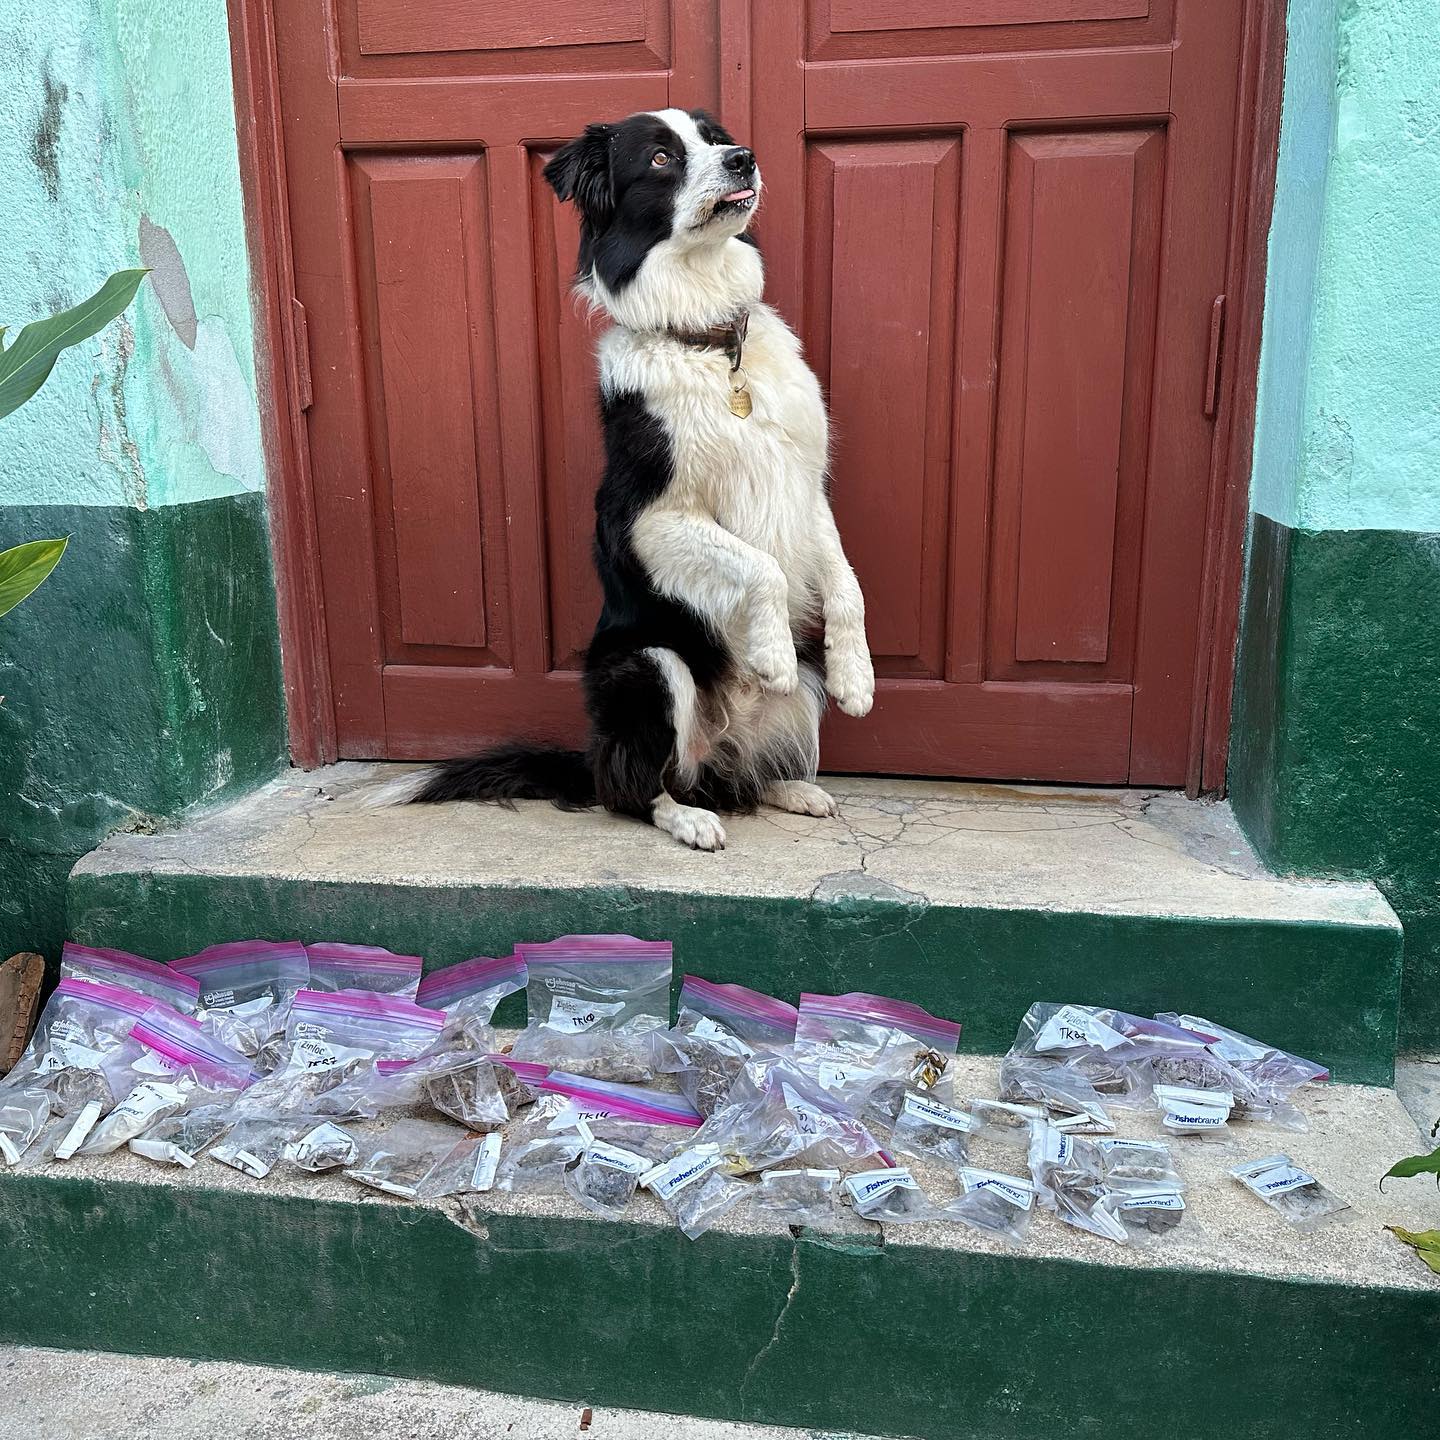 A black and white dog sits up on its hind legs with its tongue slightly sticking out. In front of the dog are several plastic bags full of samples.